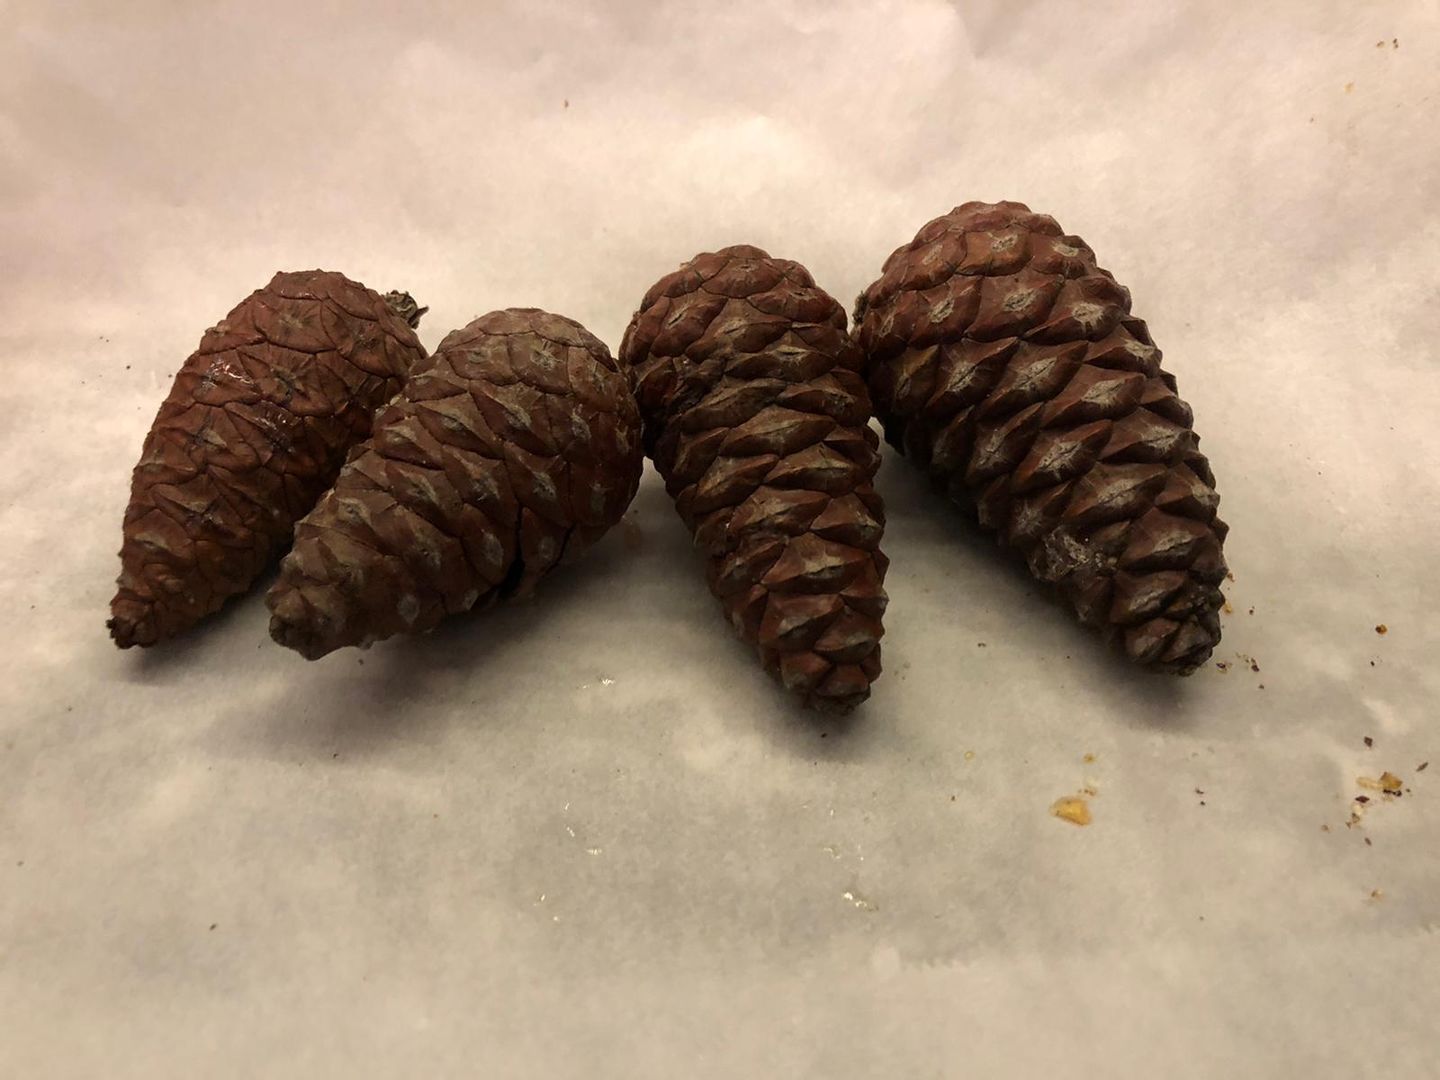 How to Make Pine Cones Pop :: Dry and Debug Pine Cones - An Extraordinary  Day